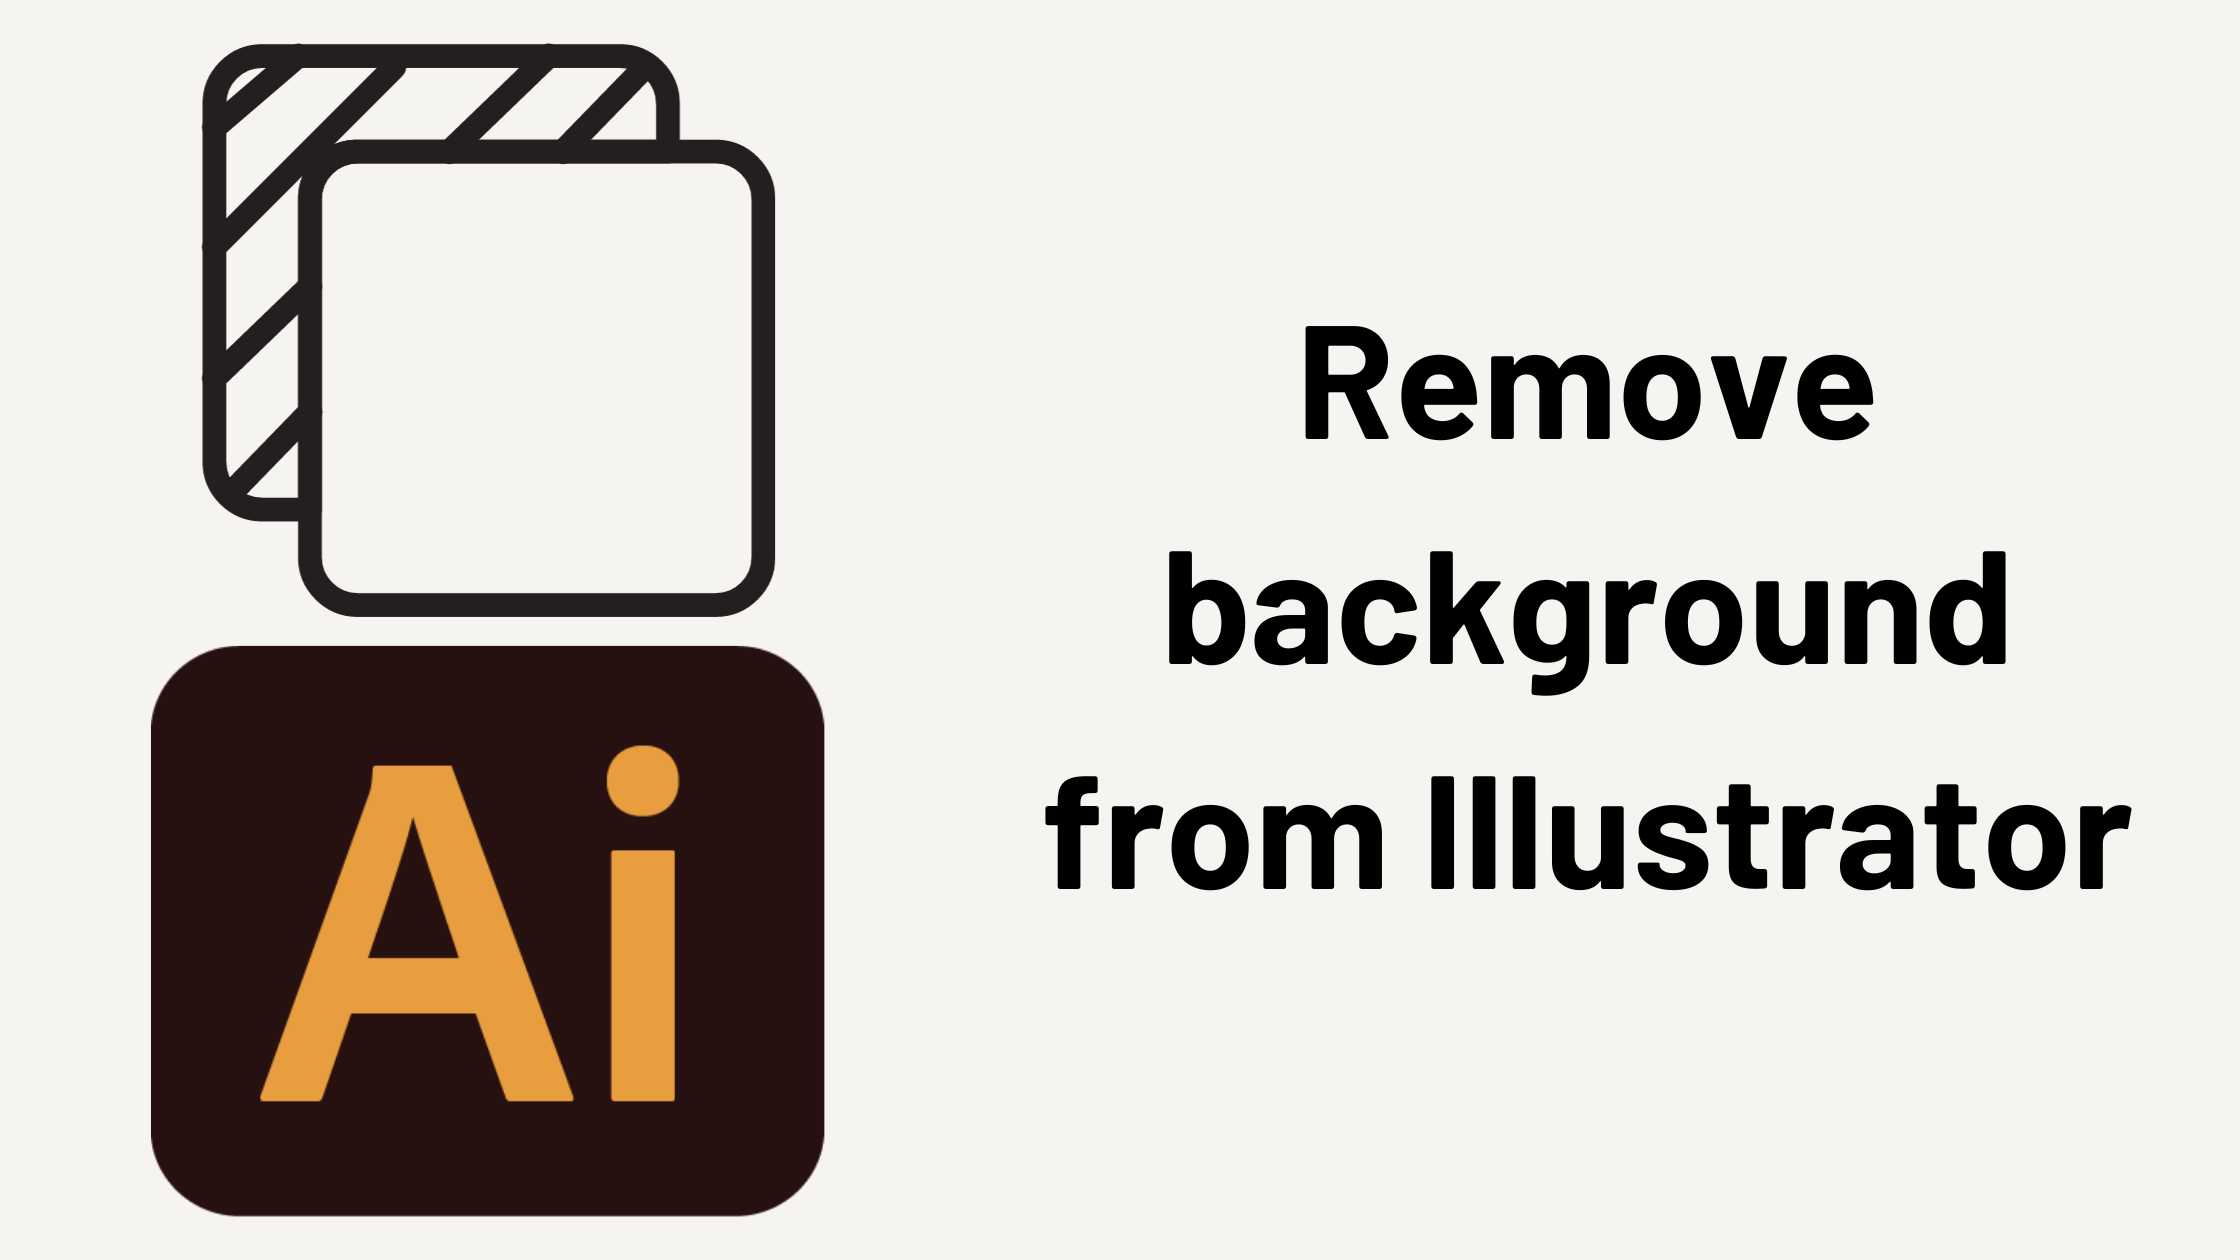 Remove background from Illustrator